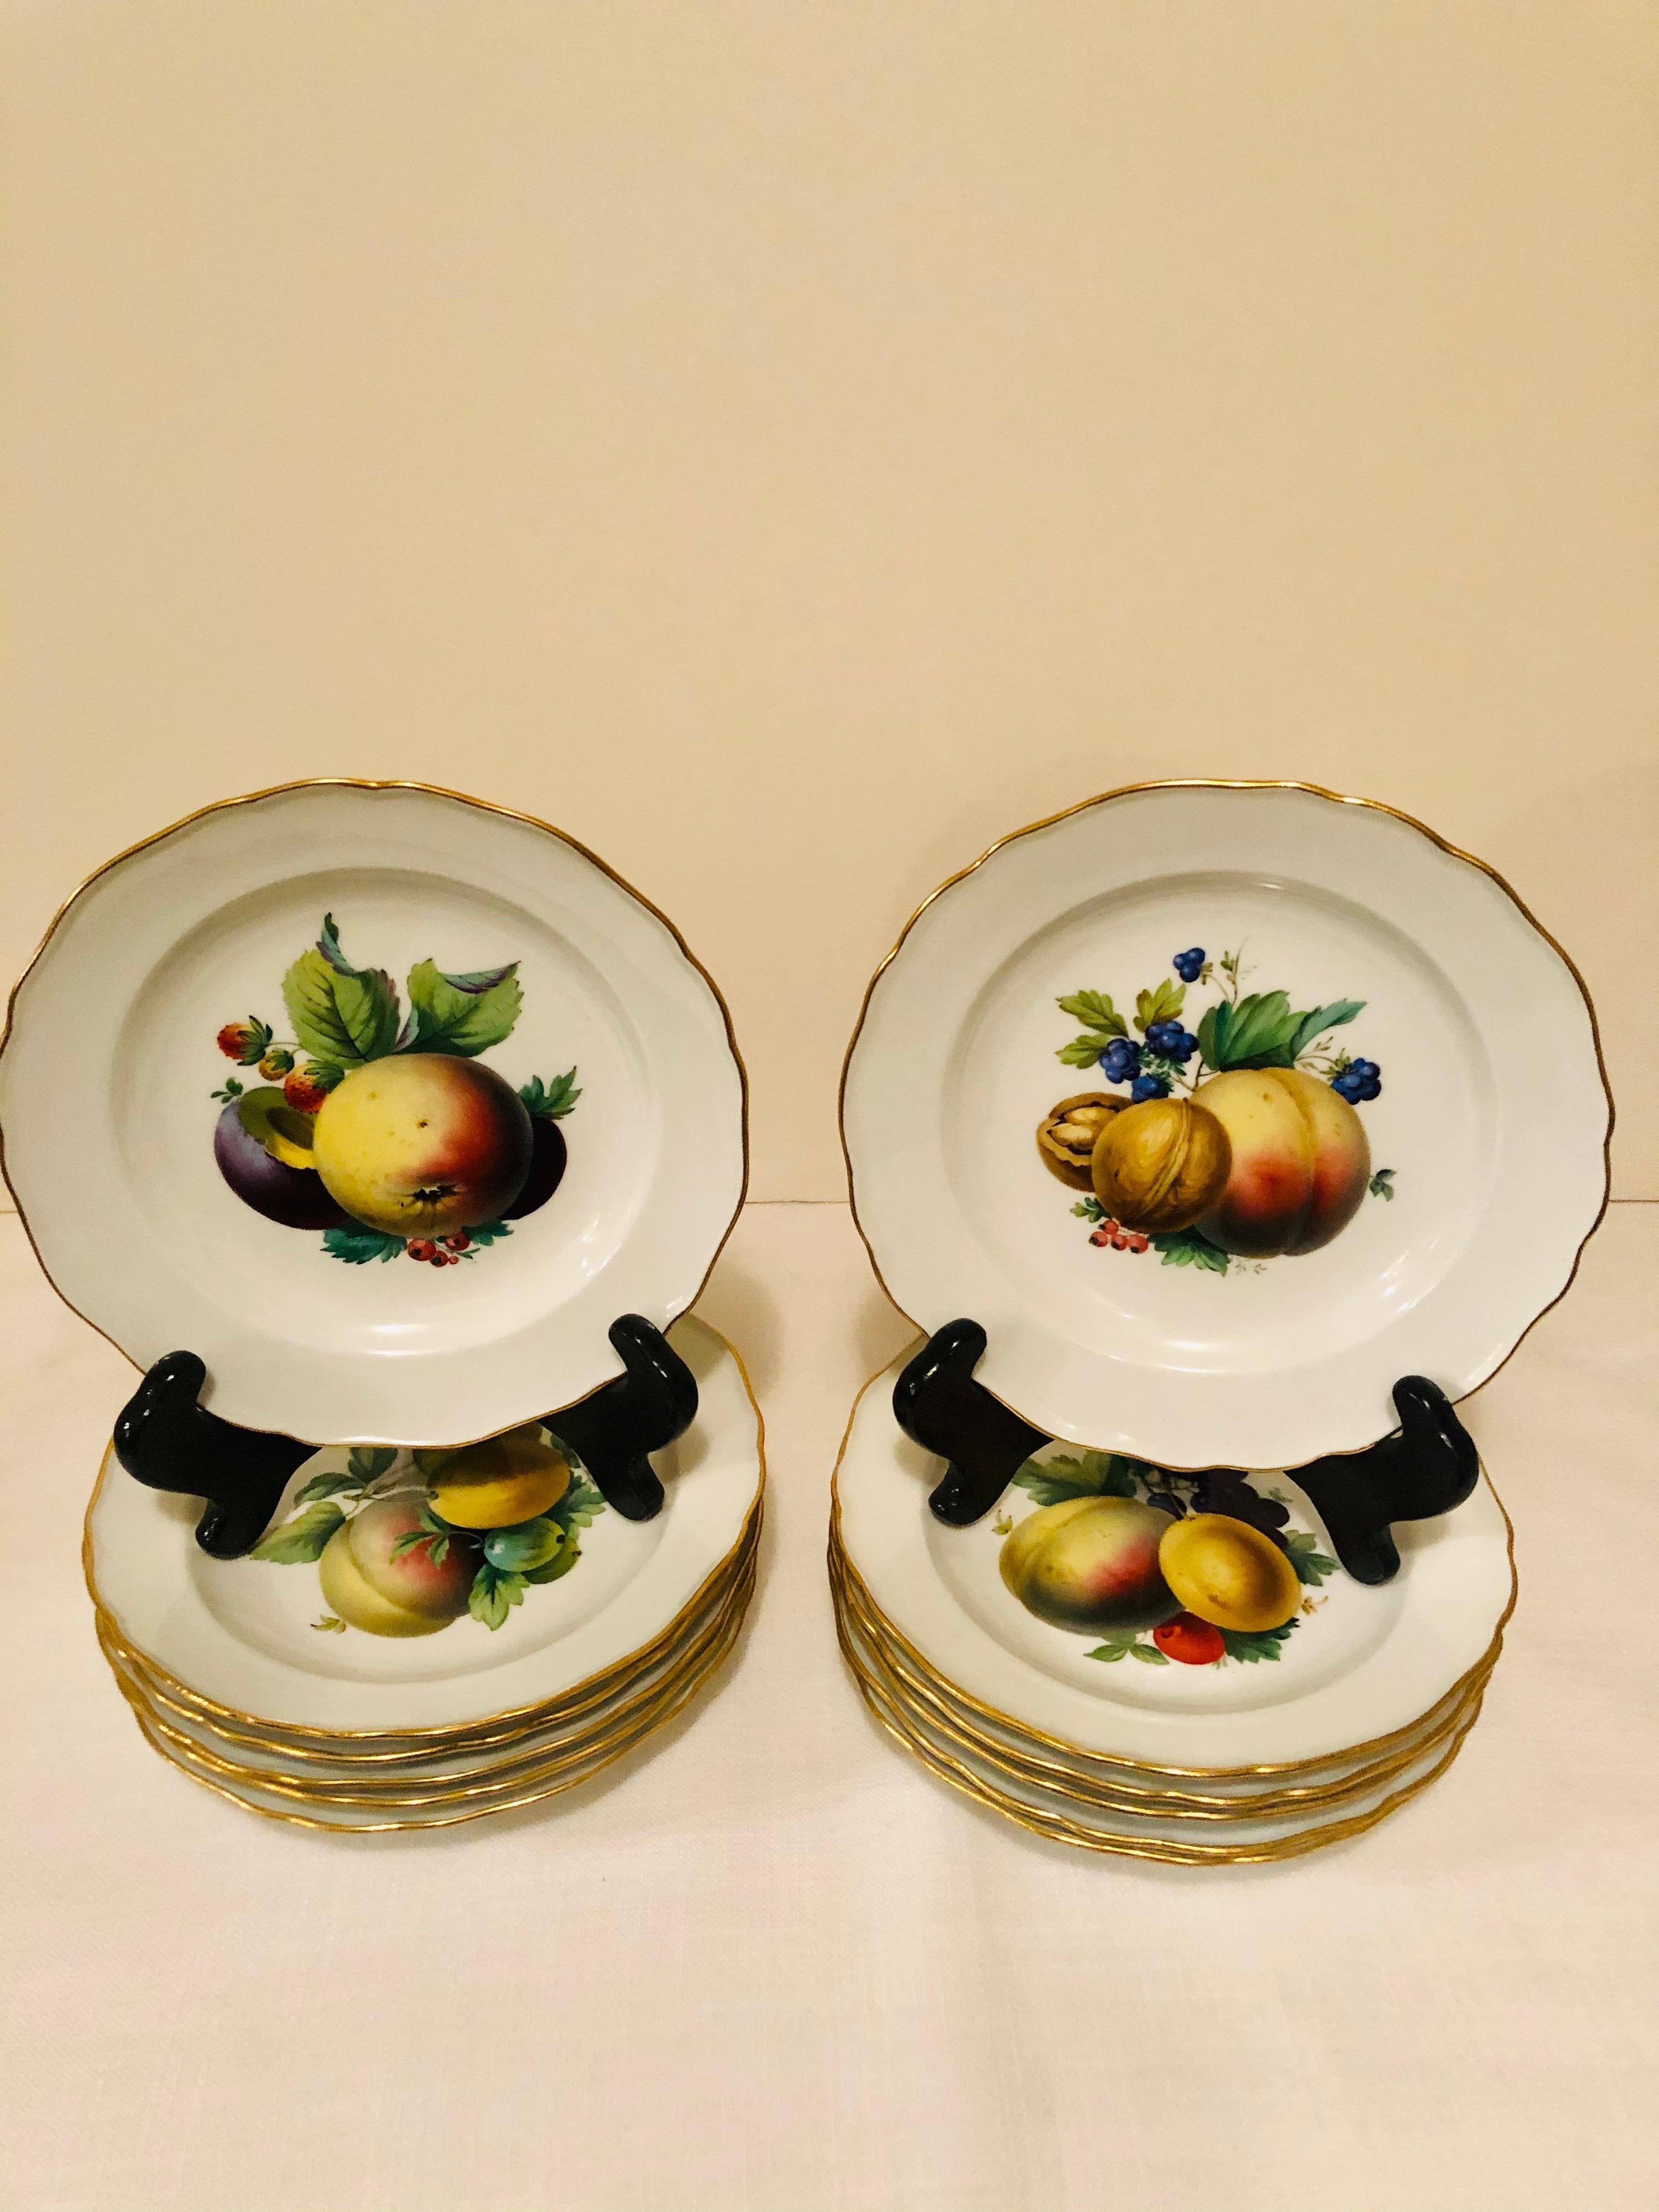 Magnificent set of twelve Meissen fruit or dessert plates with museum quality paintings of different fruits on each plate. If you scroll through the pictures, you can see the masterful artistry of the Meissen artist who painted these fruit plates.